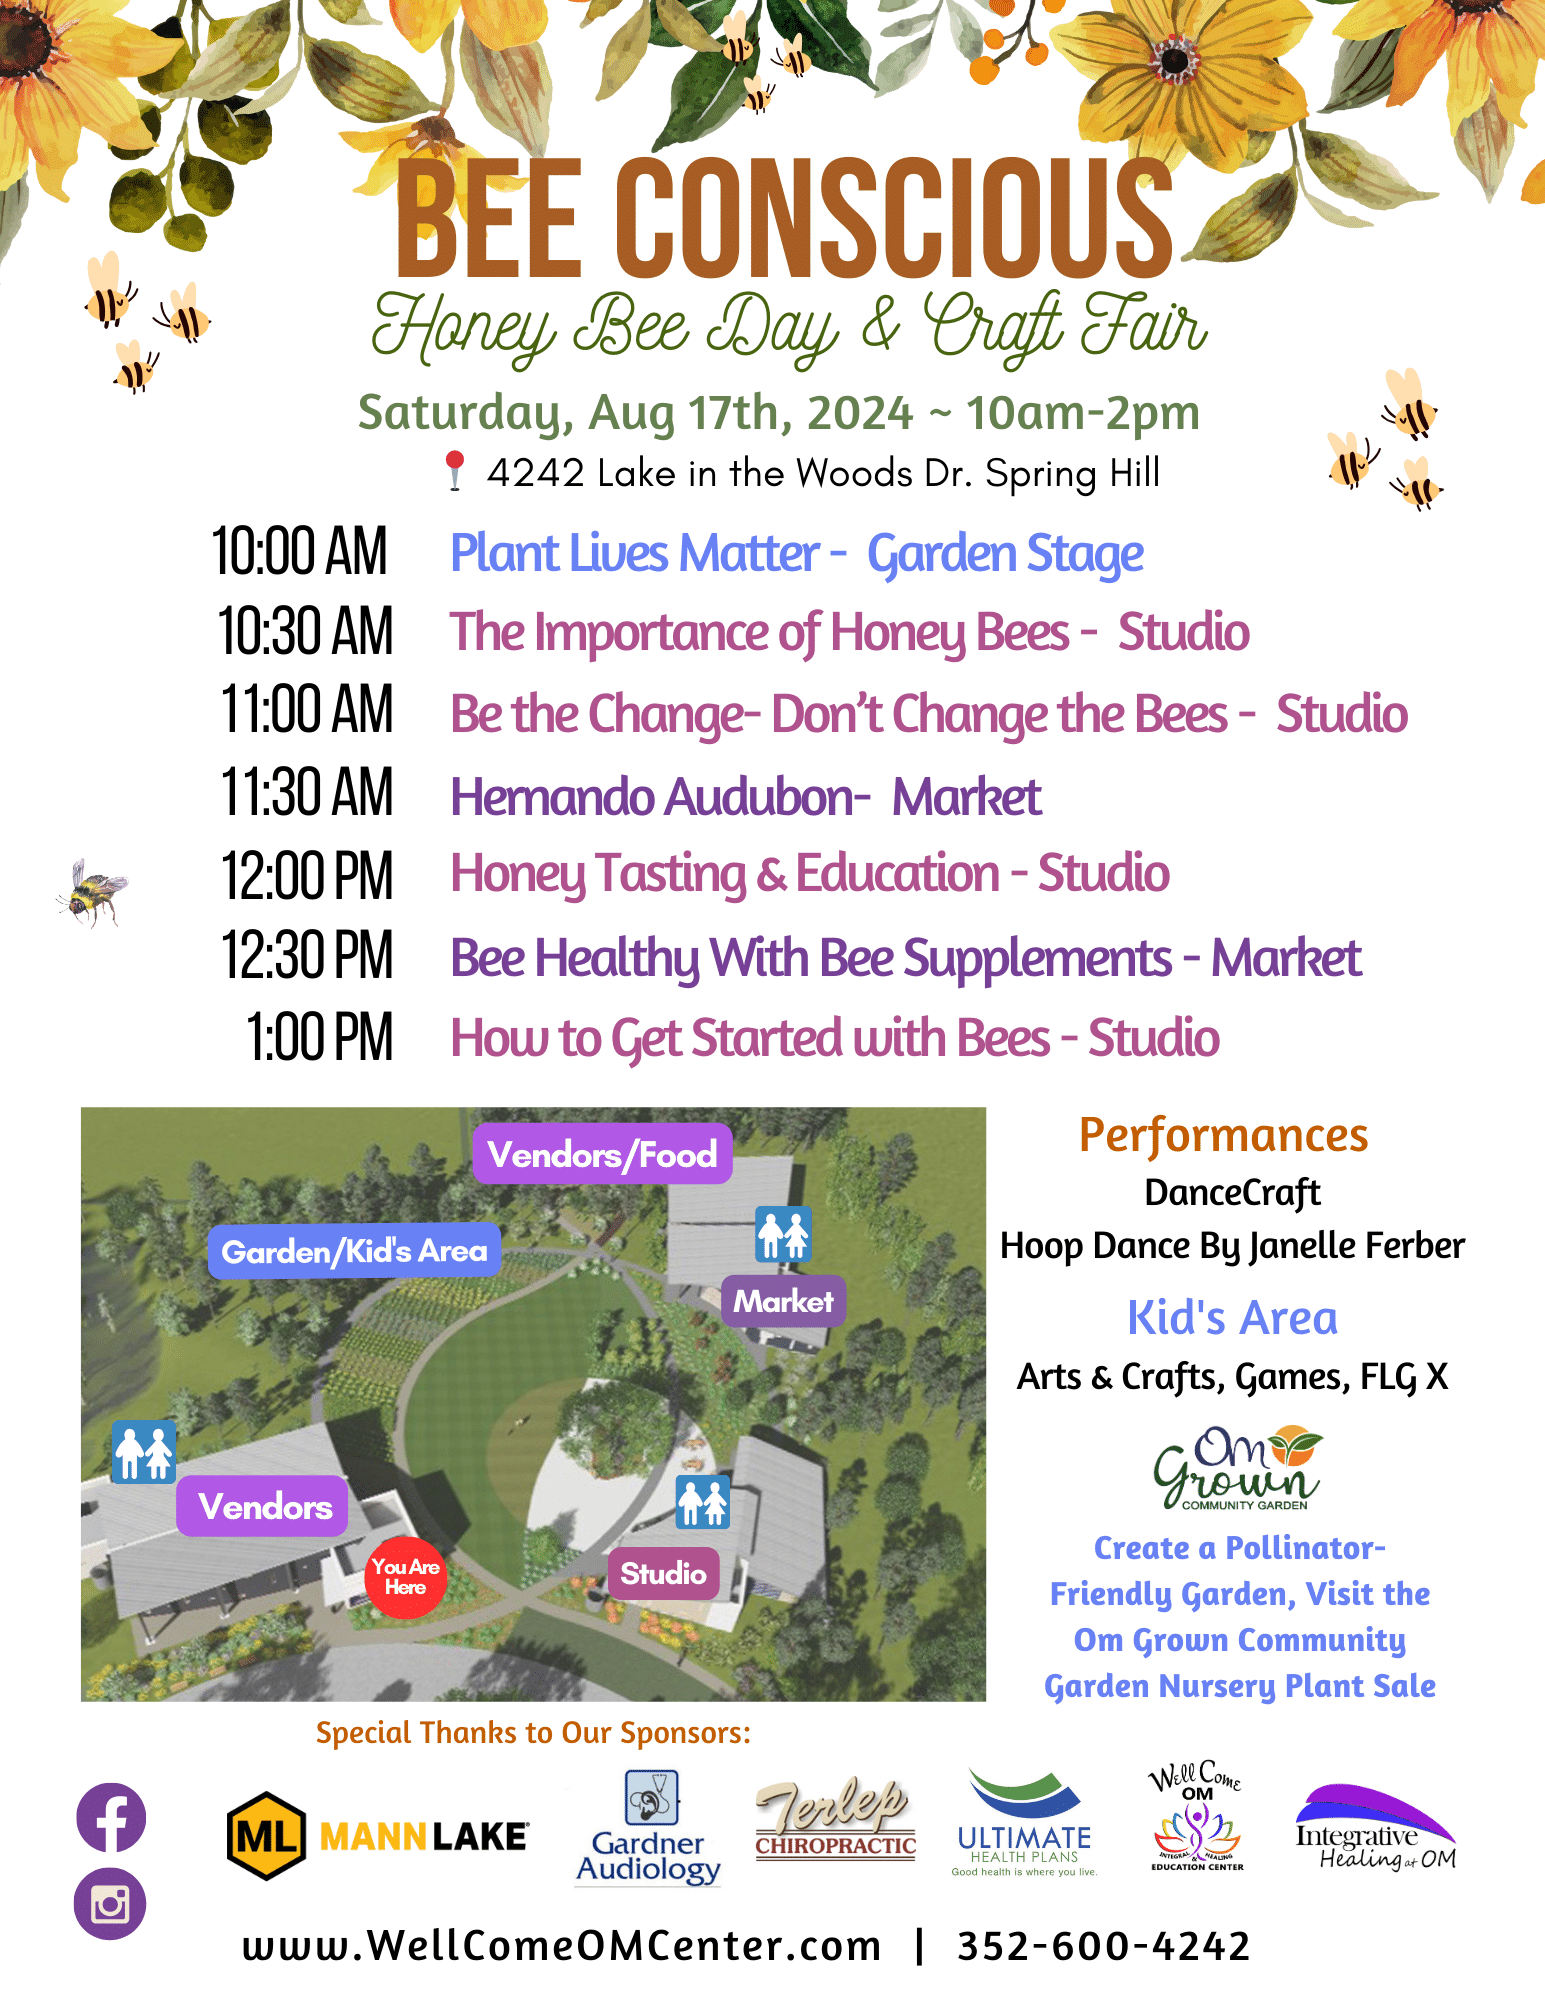 Colorful flyer promoting the '2024 Bee Conscious: Honey Bee Day & Craft Fair' on Saturday, August 17, from 10 am to 2 pm at The Wellcome Om Center in Spring Hill, FL. Featuring educational workshops on pollinators, craft vendors, and food. Sponsors listed at the bottom.